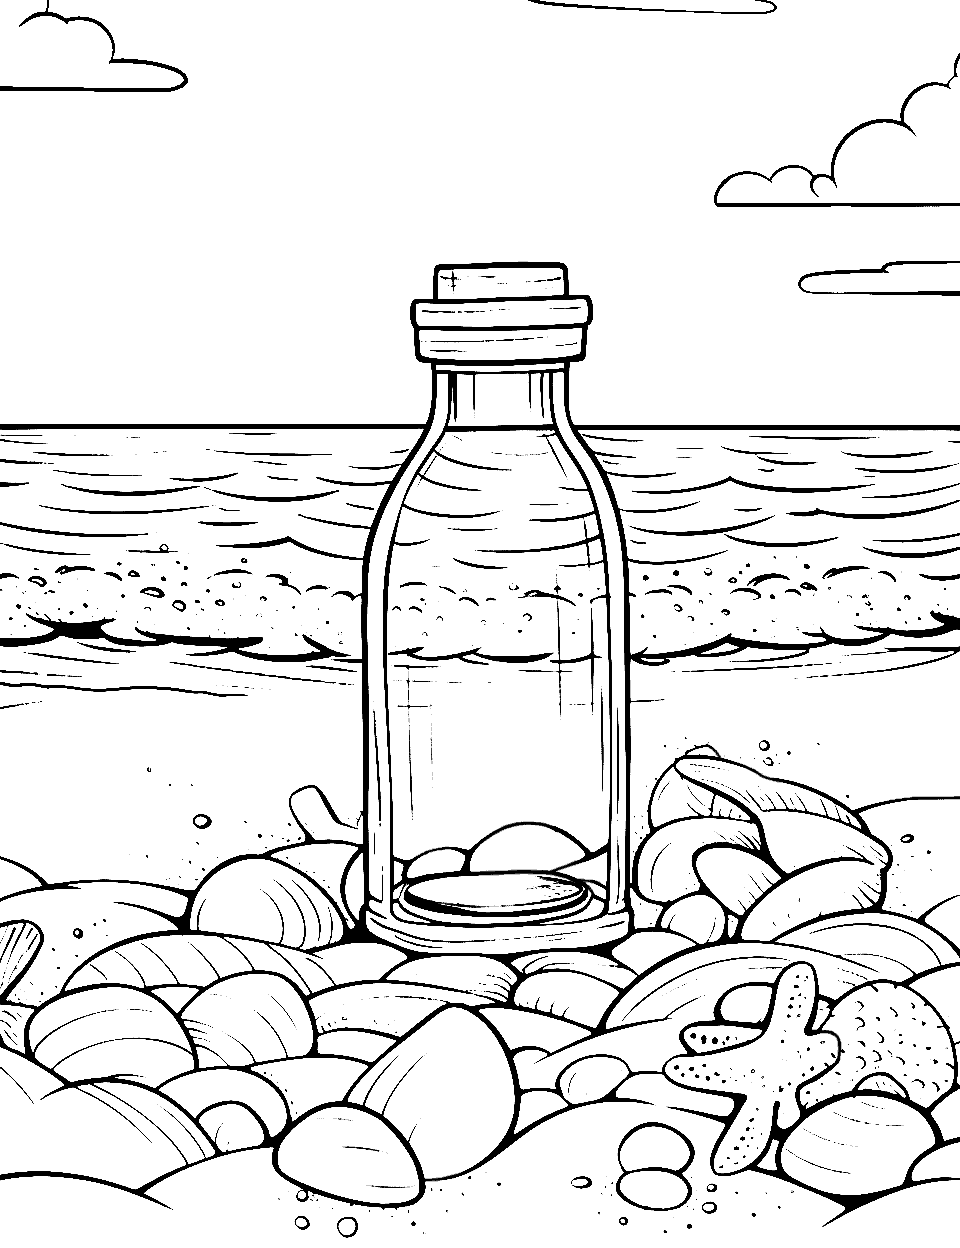 Bottle on a beach Coloring Page - A sealed bottle resting amidst small beach rocks.